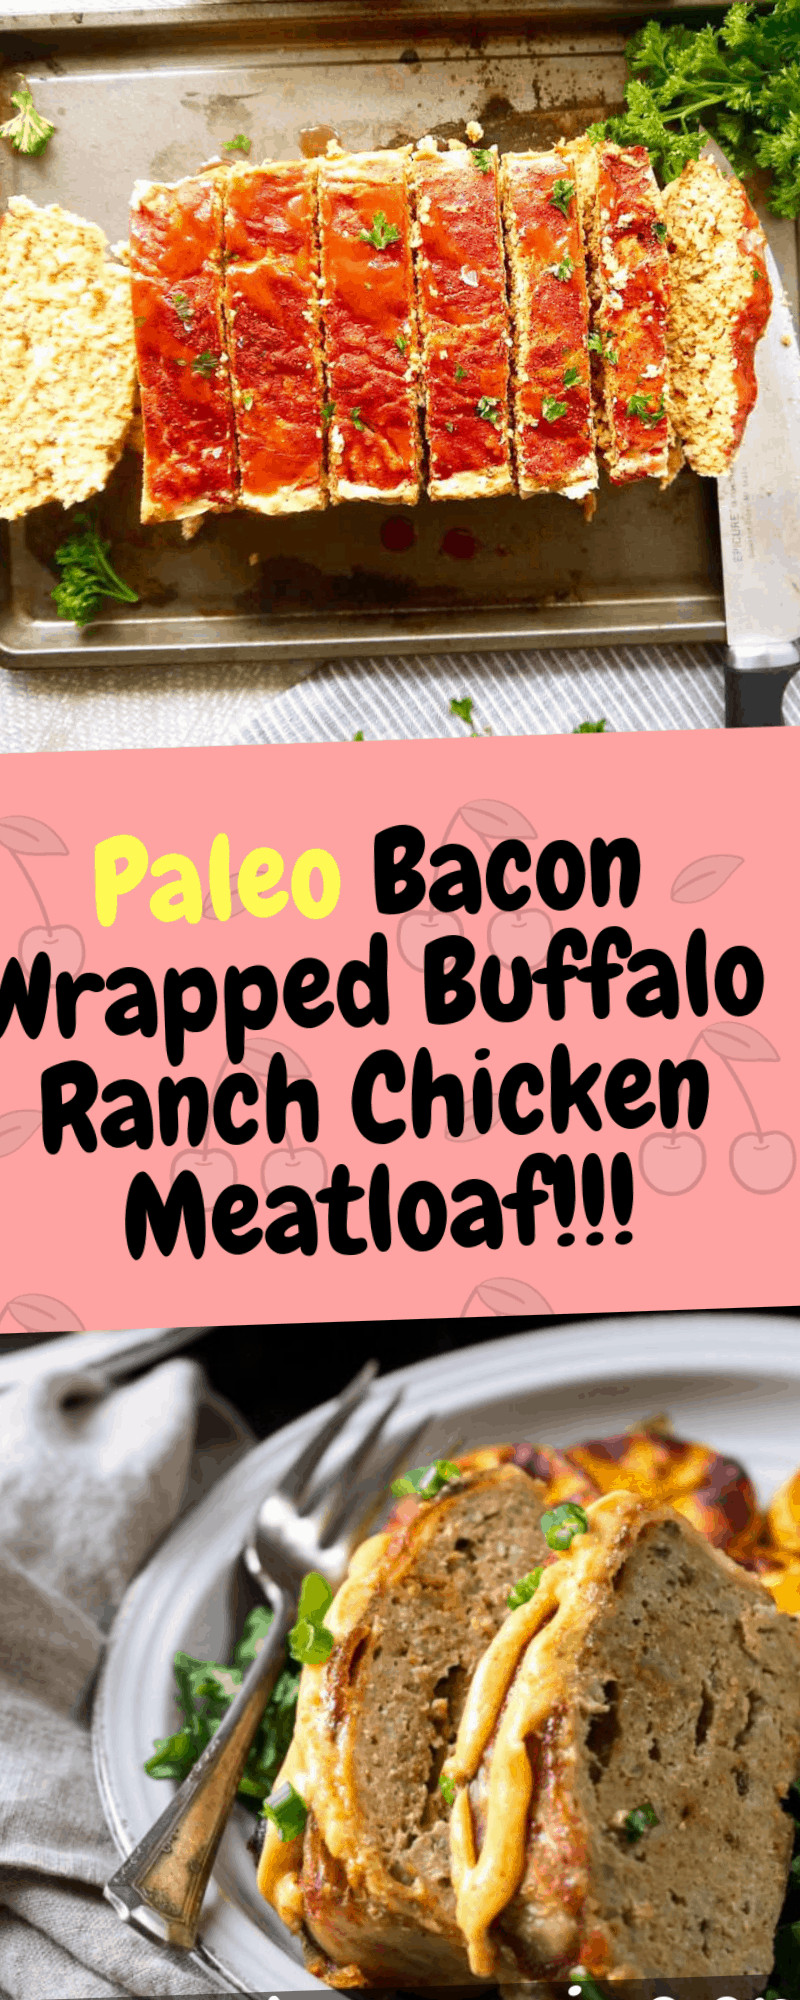 Chicken Meatloaf Paleo
 Paleo Bacon Wrapped Buffalo Ranch Chicken Meatloaf